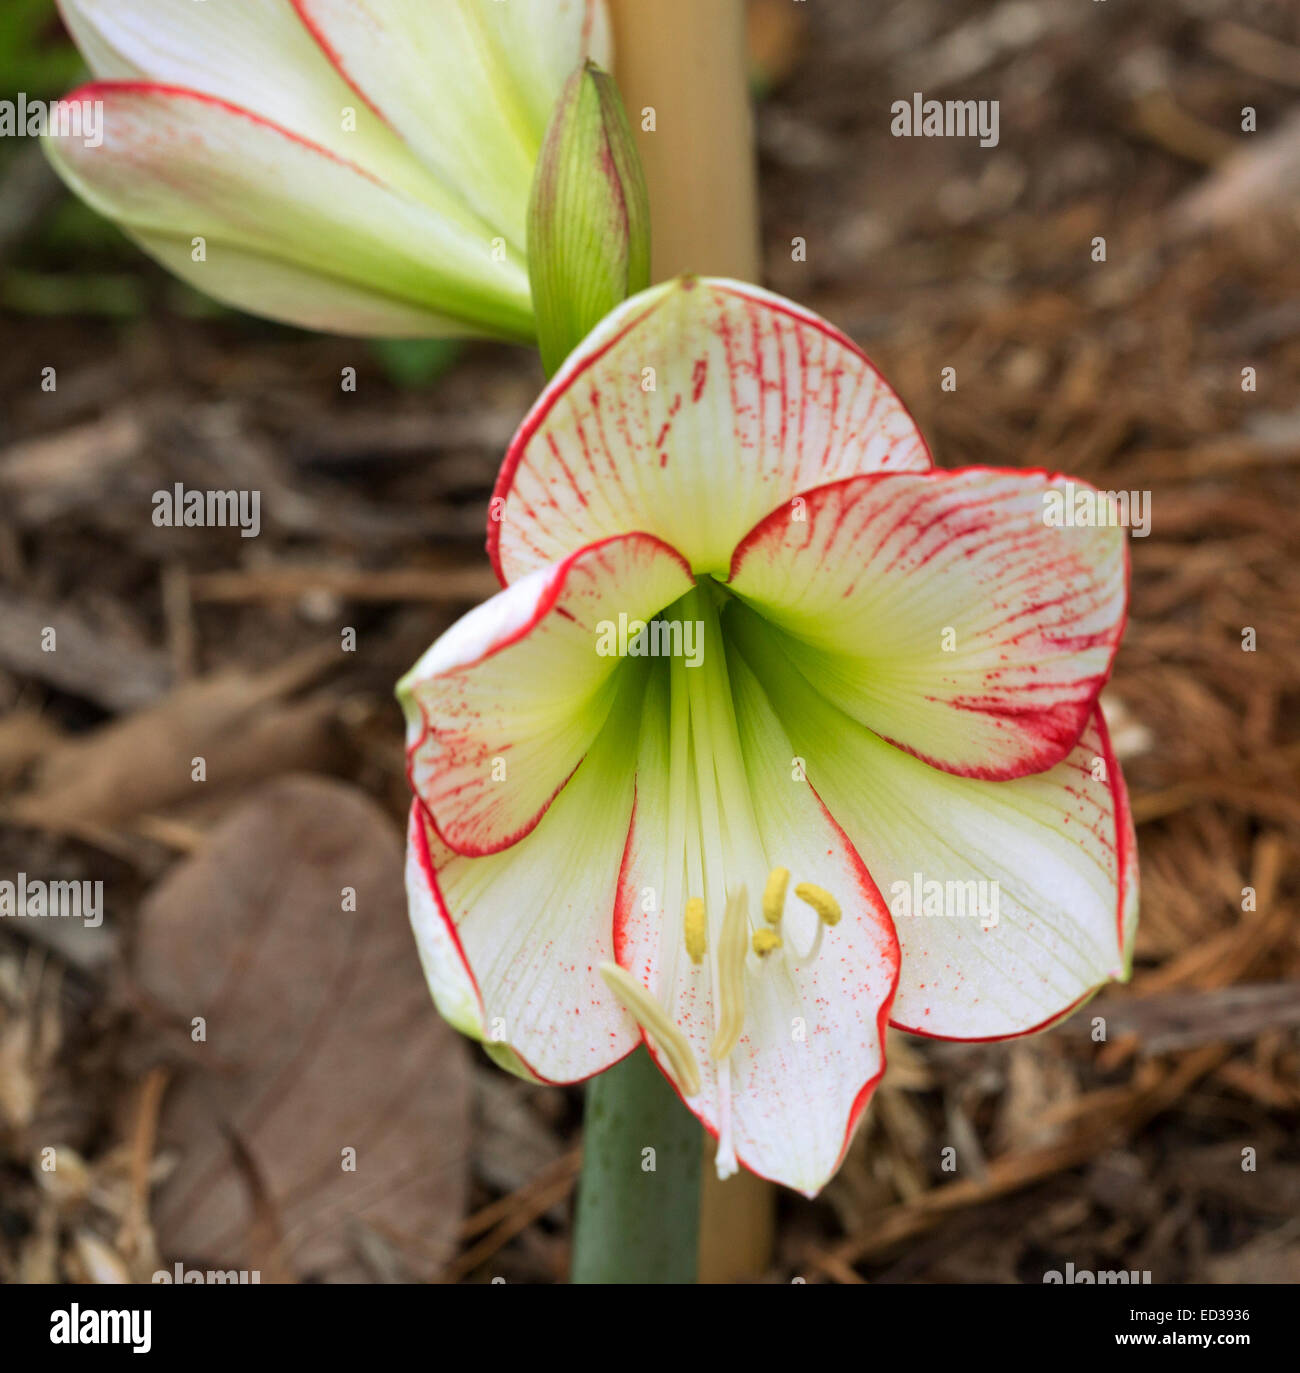 Stunning white flower with vivid red streaks on petals and edges, & bright green throat - Hippeastrum cultivar 'My Picotee' Stock Photo